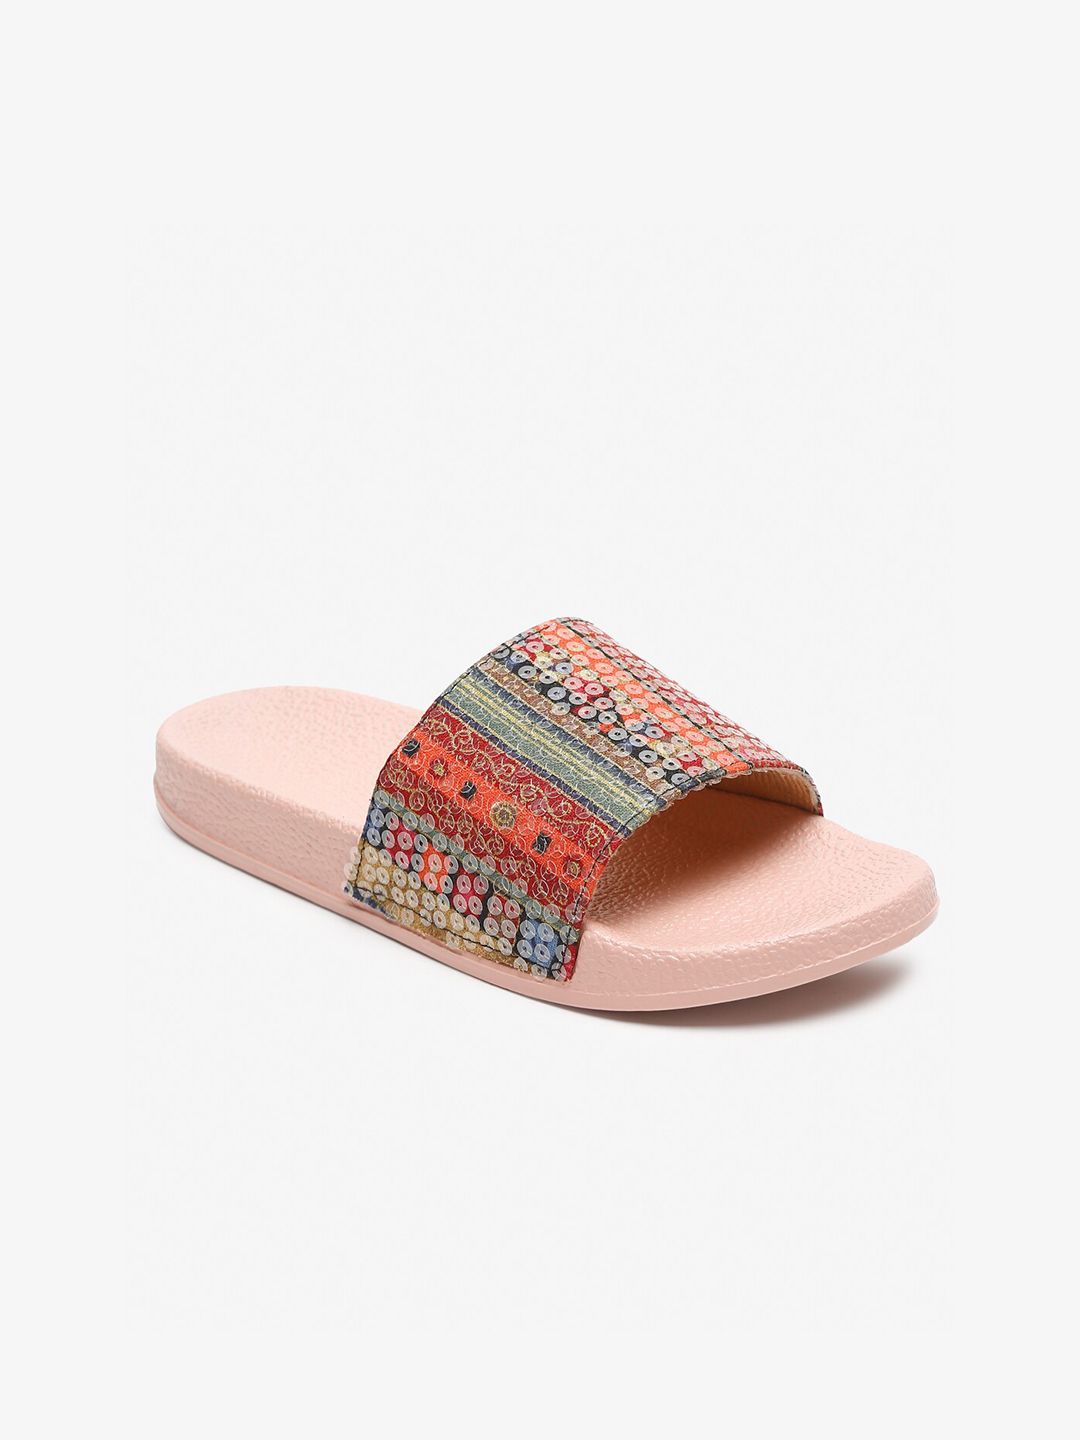 Misto Women Pink & Green Embellished Sliders Price in India